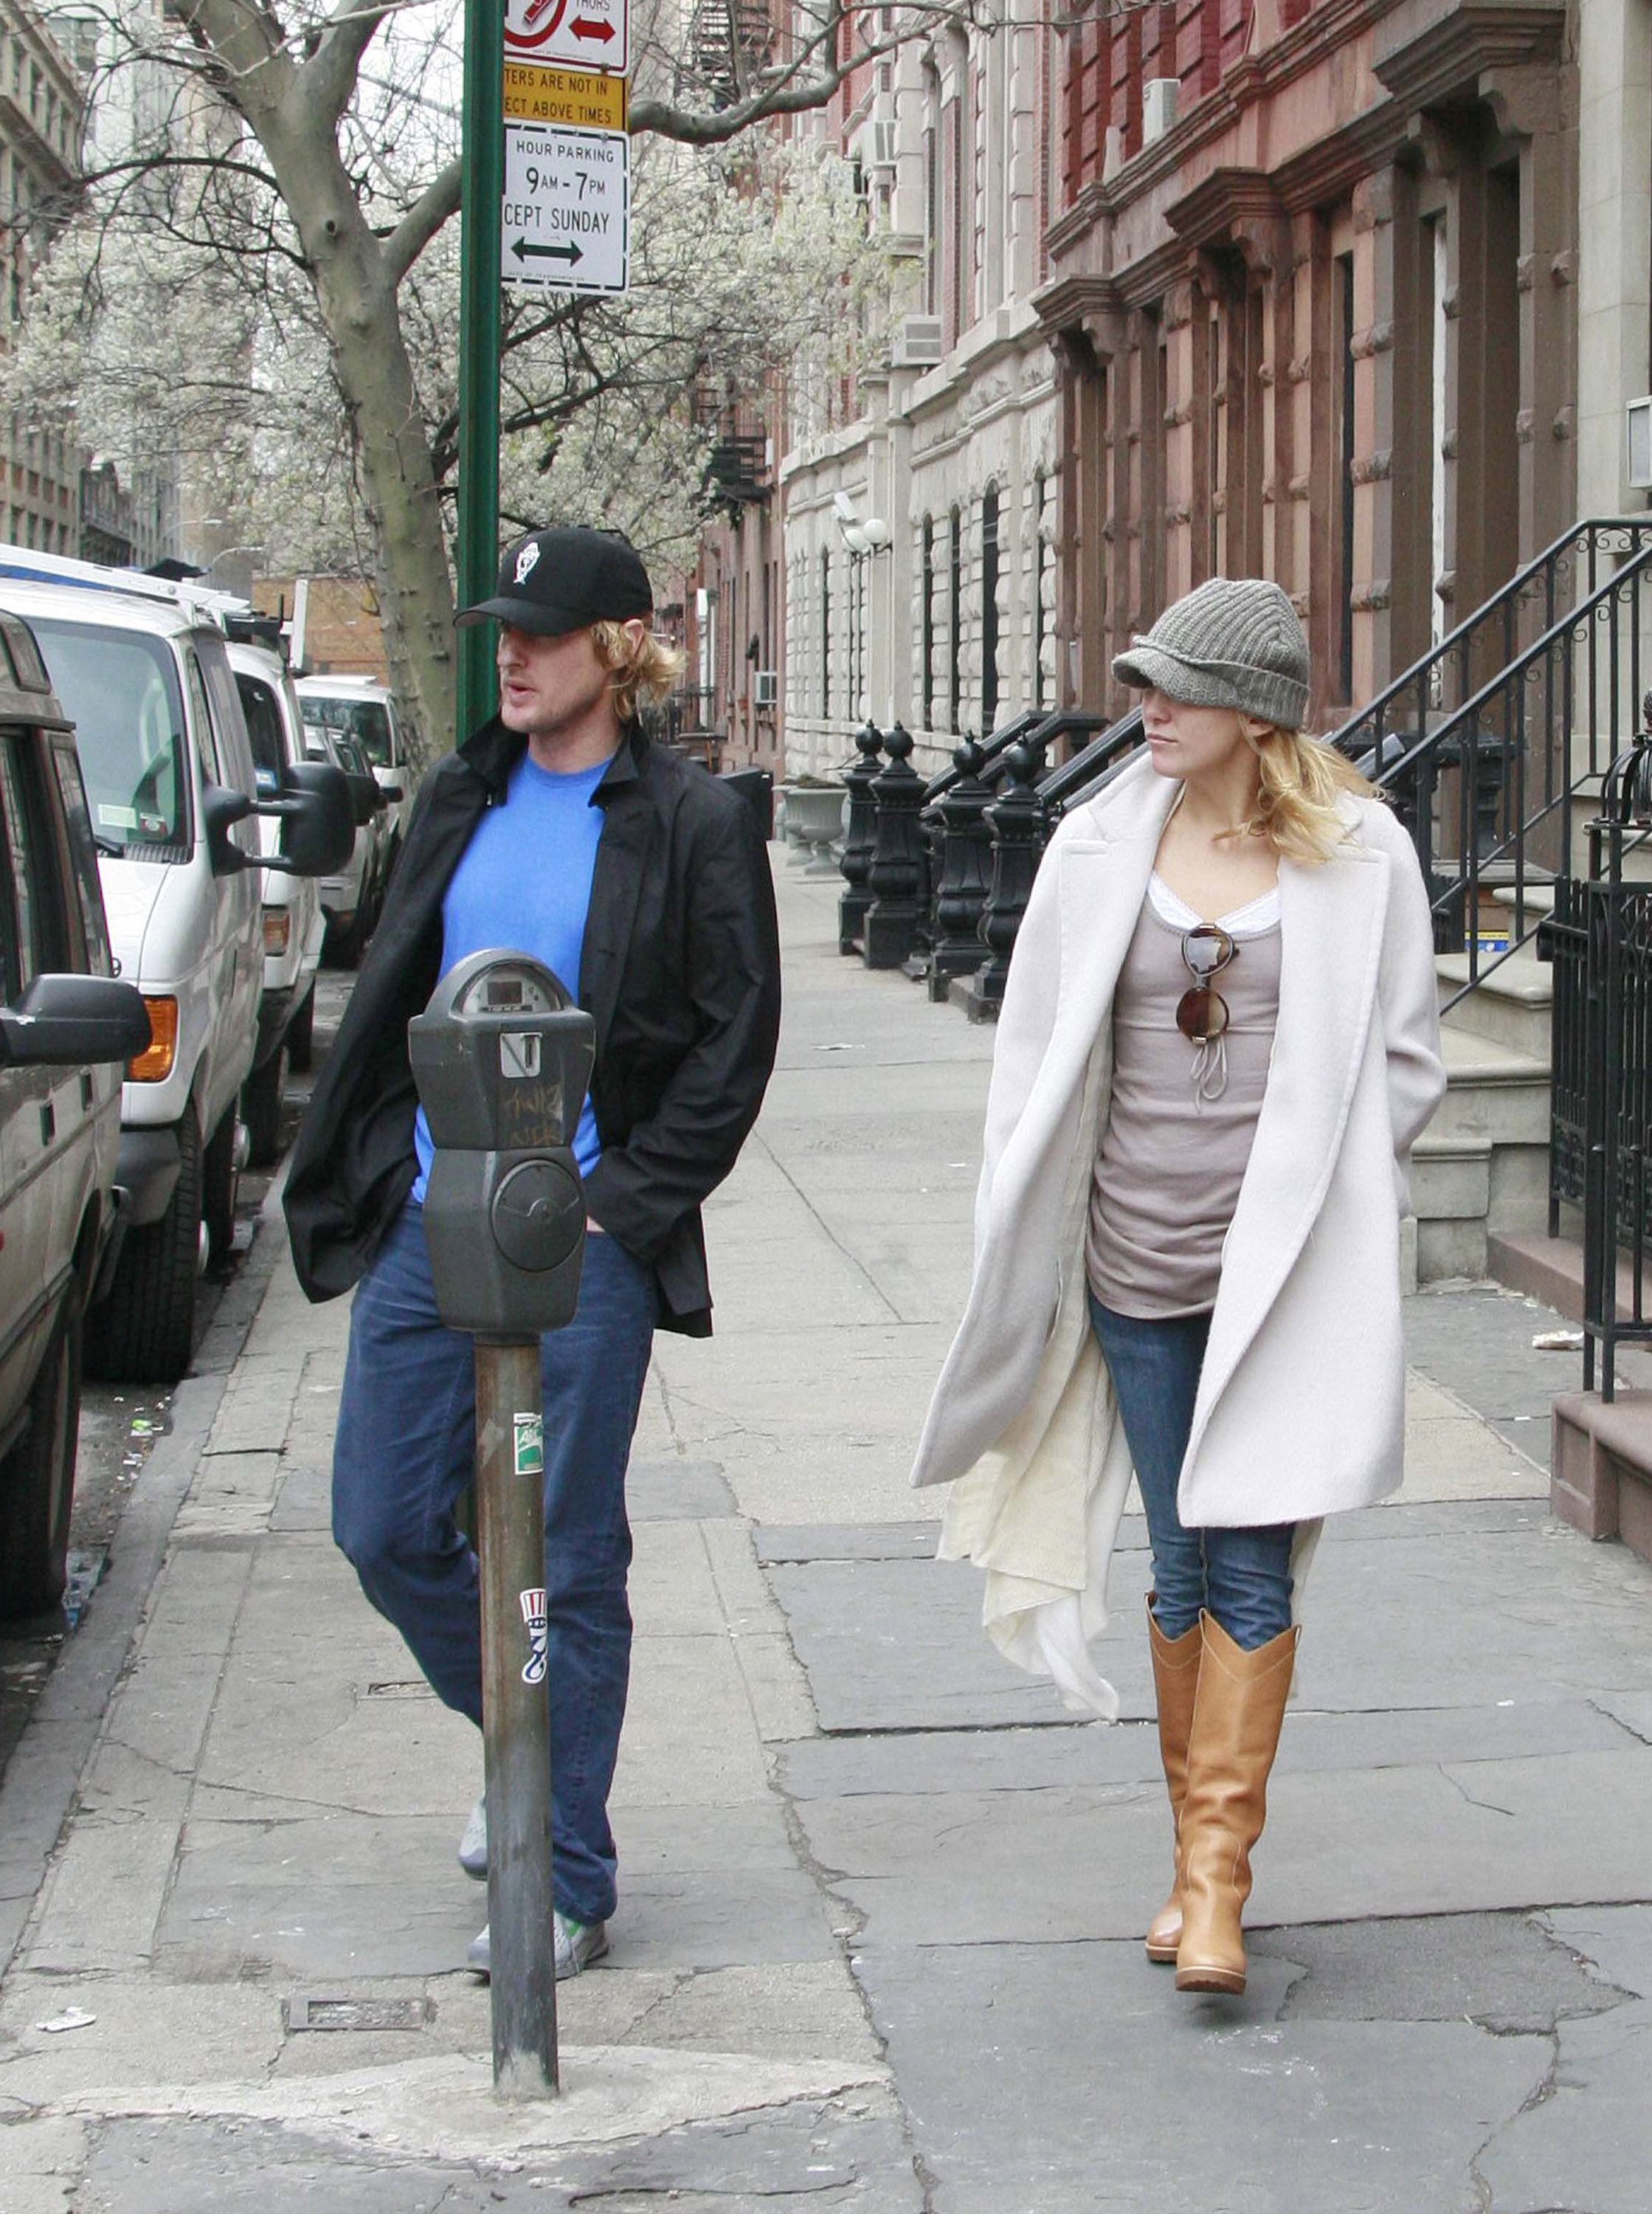 Owen Wilson and Kate Hudson in New York on April 19, 2007. | Source: Marcel Thomas/FilmMagic/Getty Images